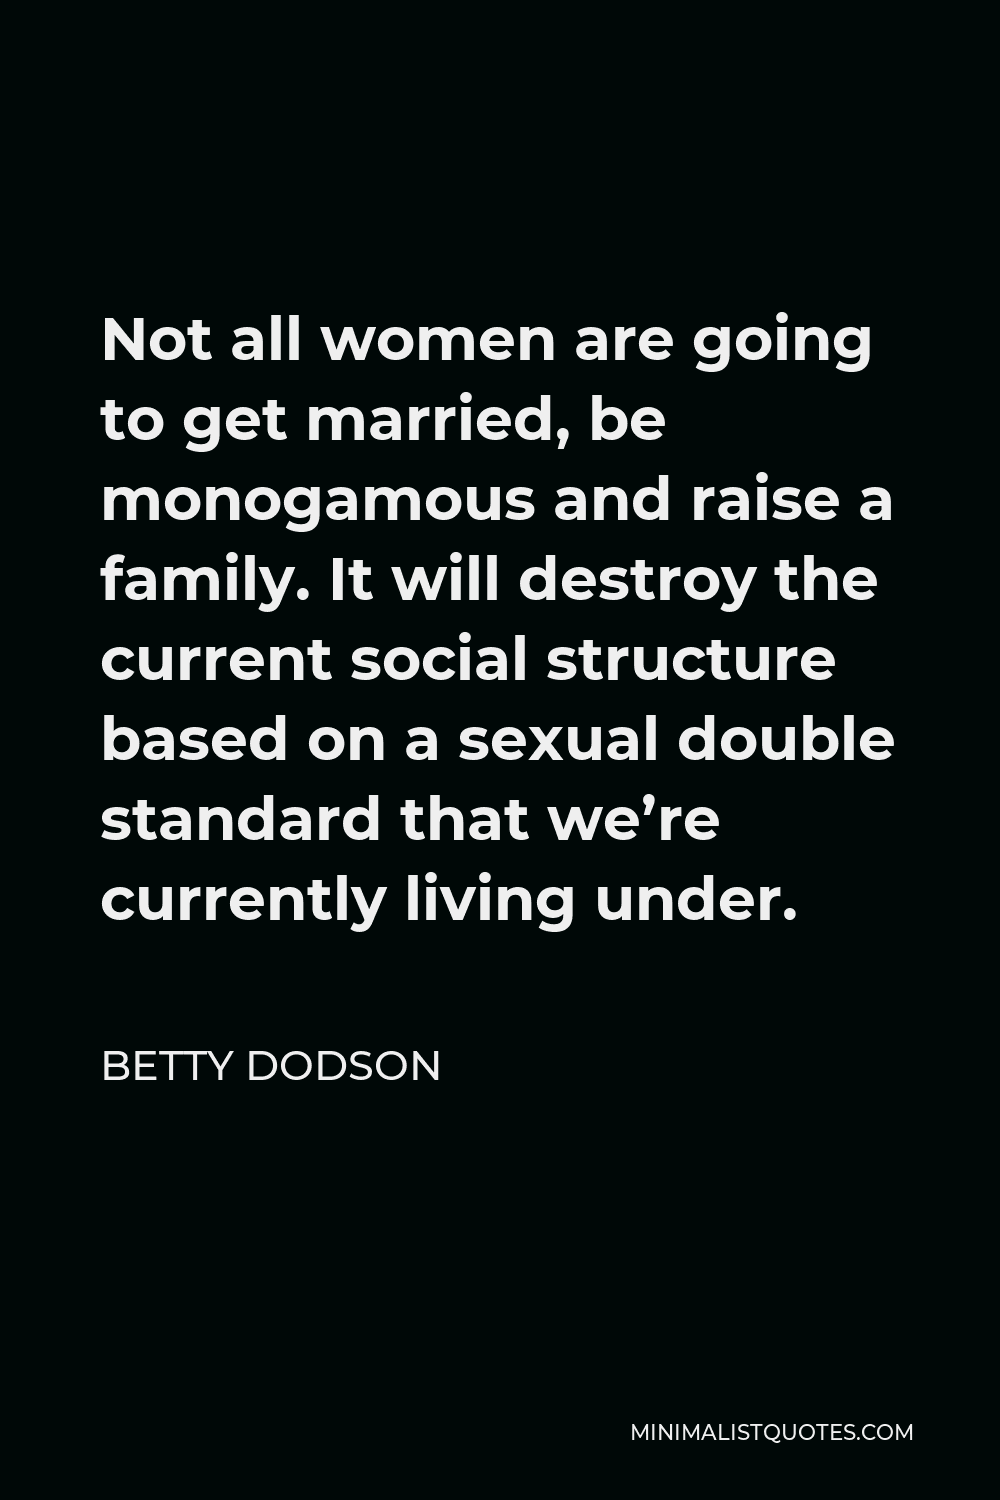 Betty Dodson Quote - Not all women are going to get married, be monogamous and raise a family. It will destroy the current social structure based on a sexual double standard that we’re currently living under.